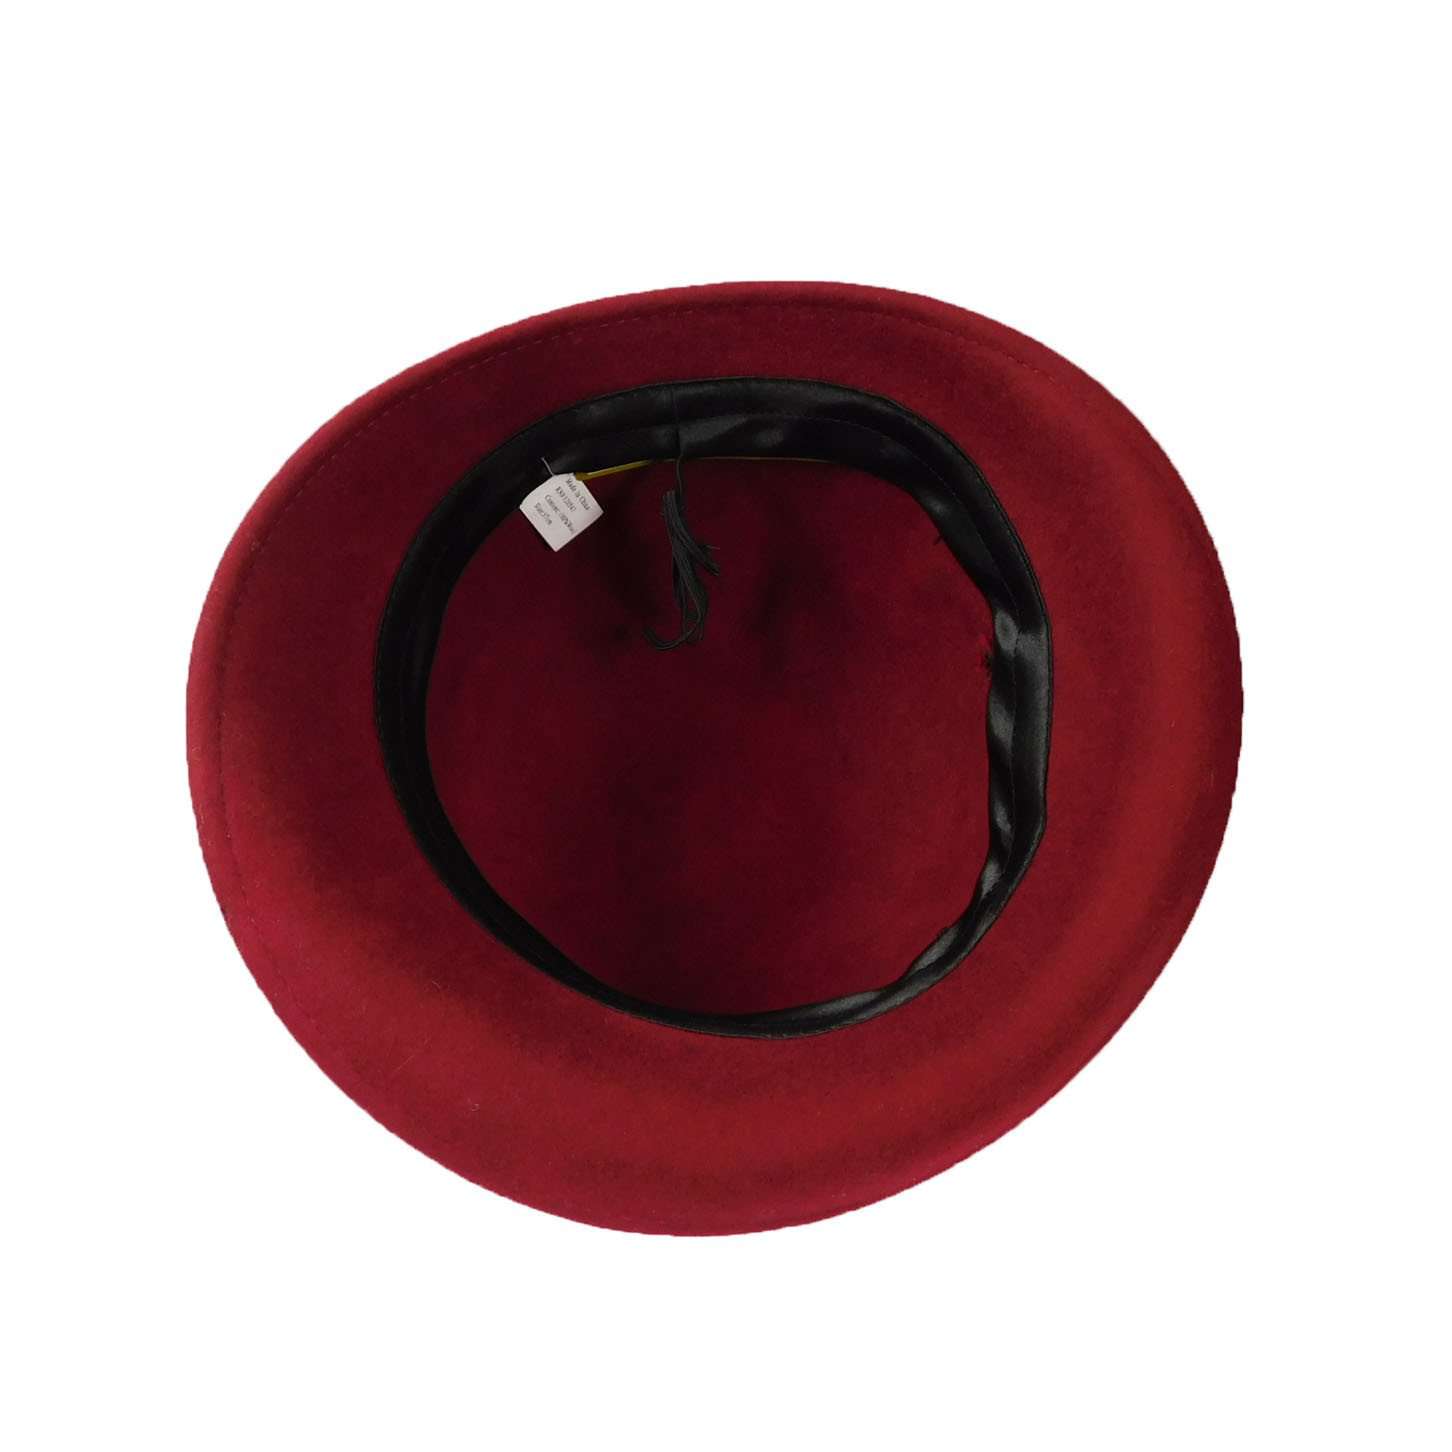 Curled Brim Cloche with Wide Band, Cloche - SetarTrading Hats 